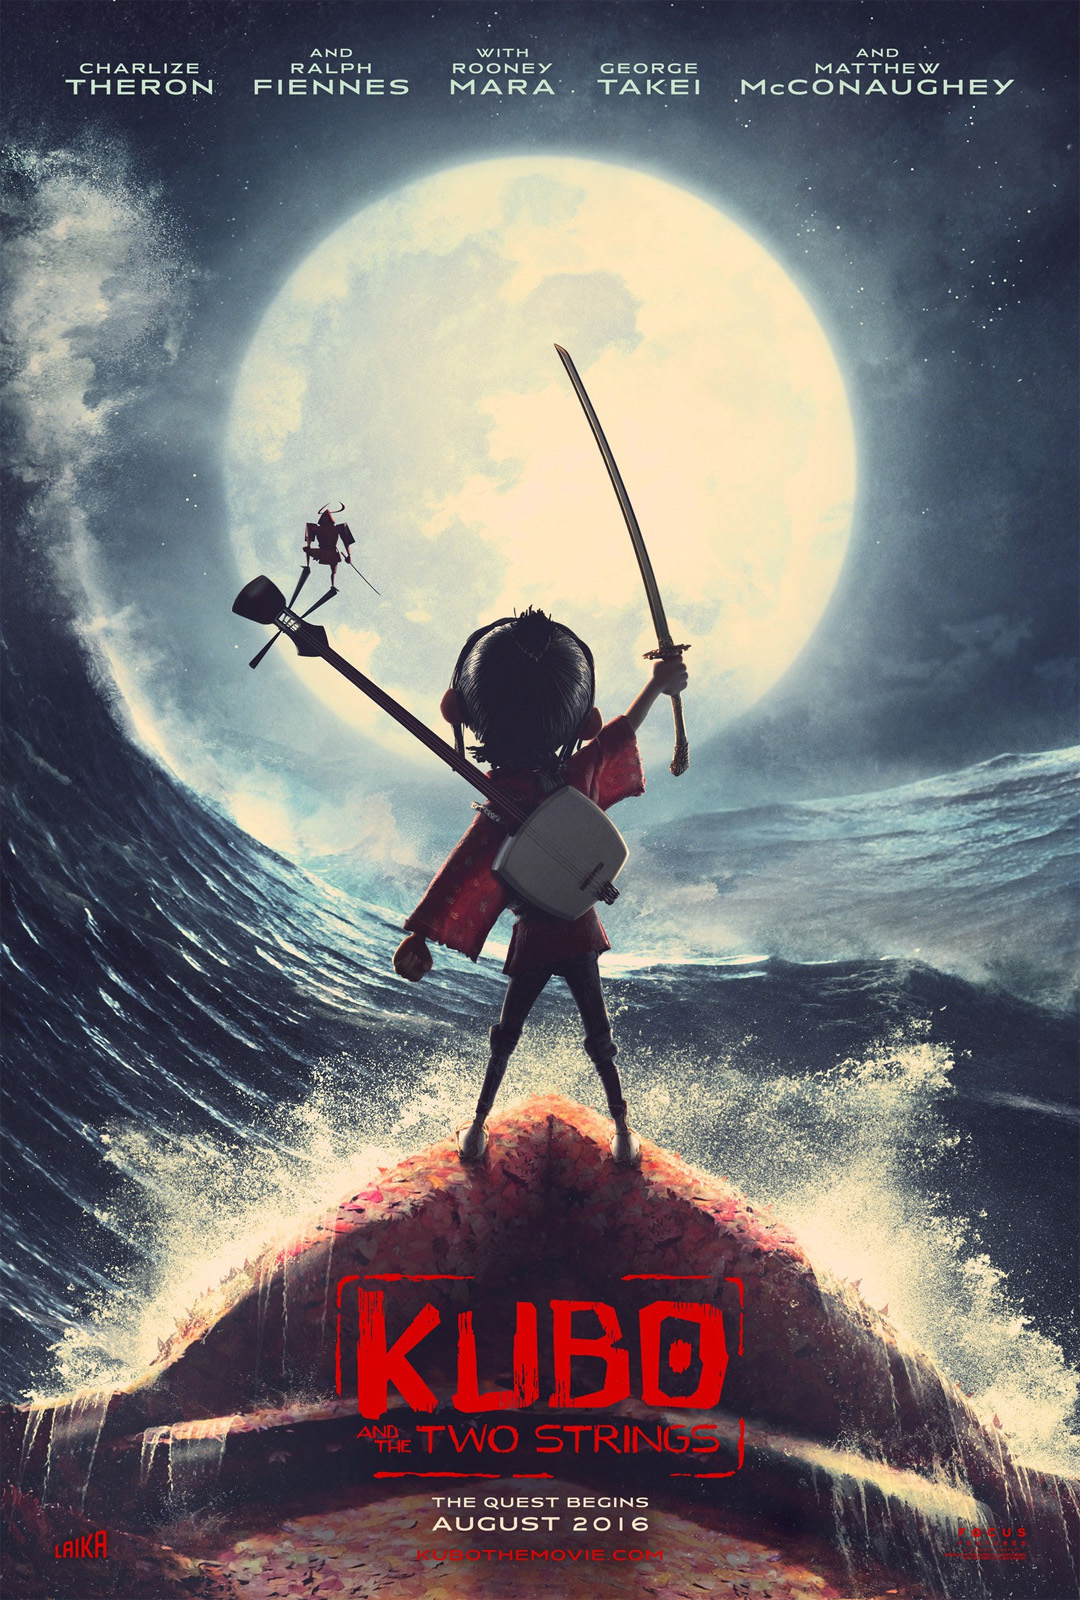 Kubo And The Two Strings-28Janeiro2016 (1)